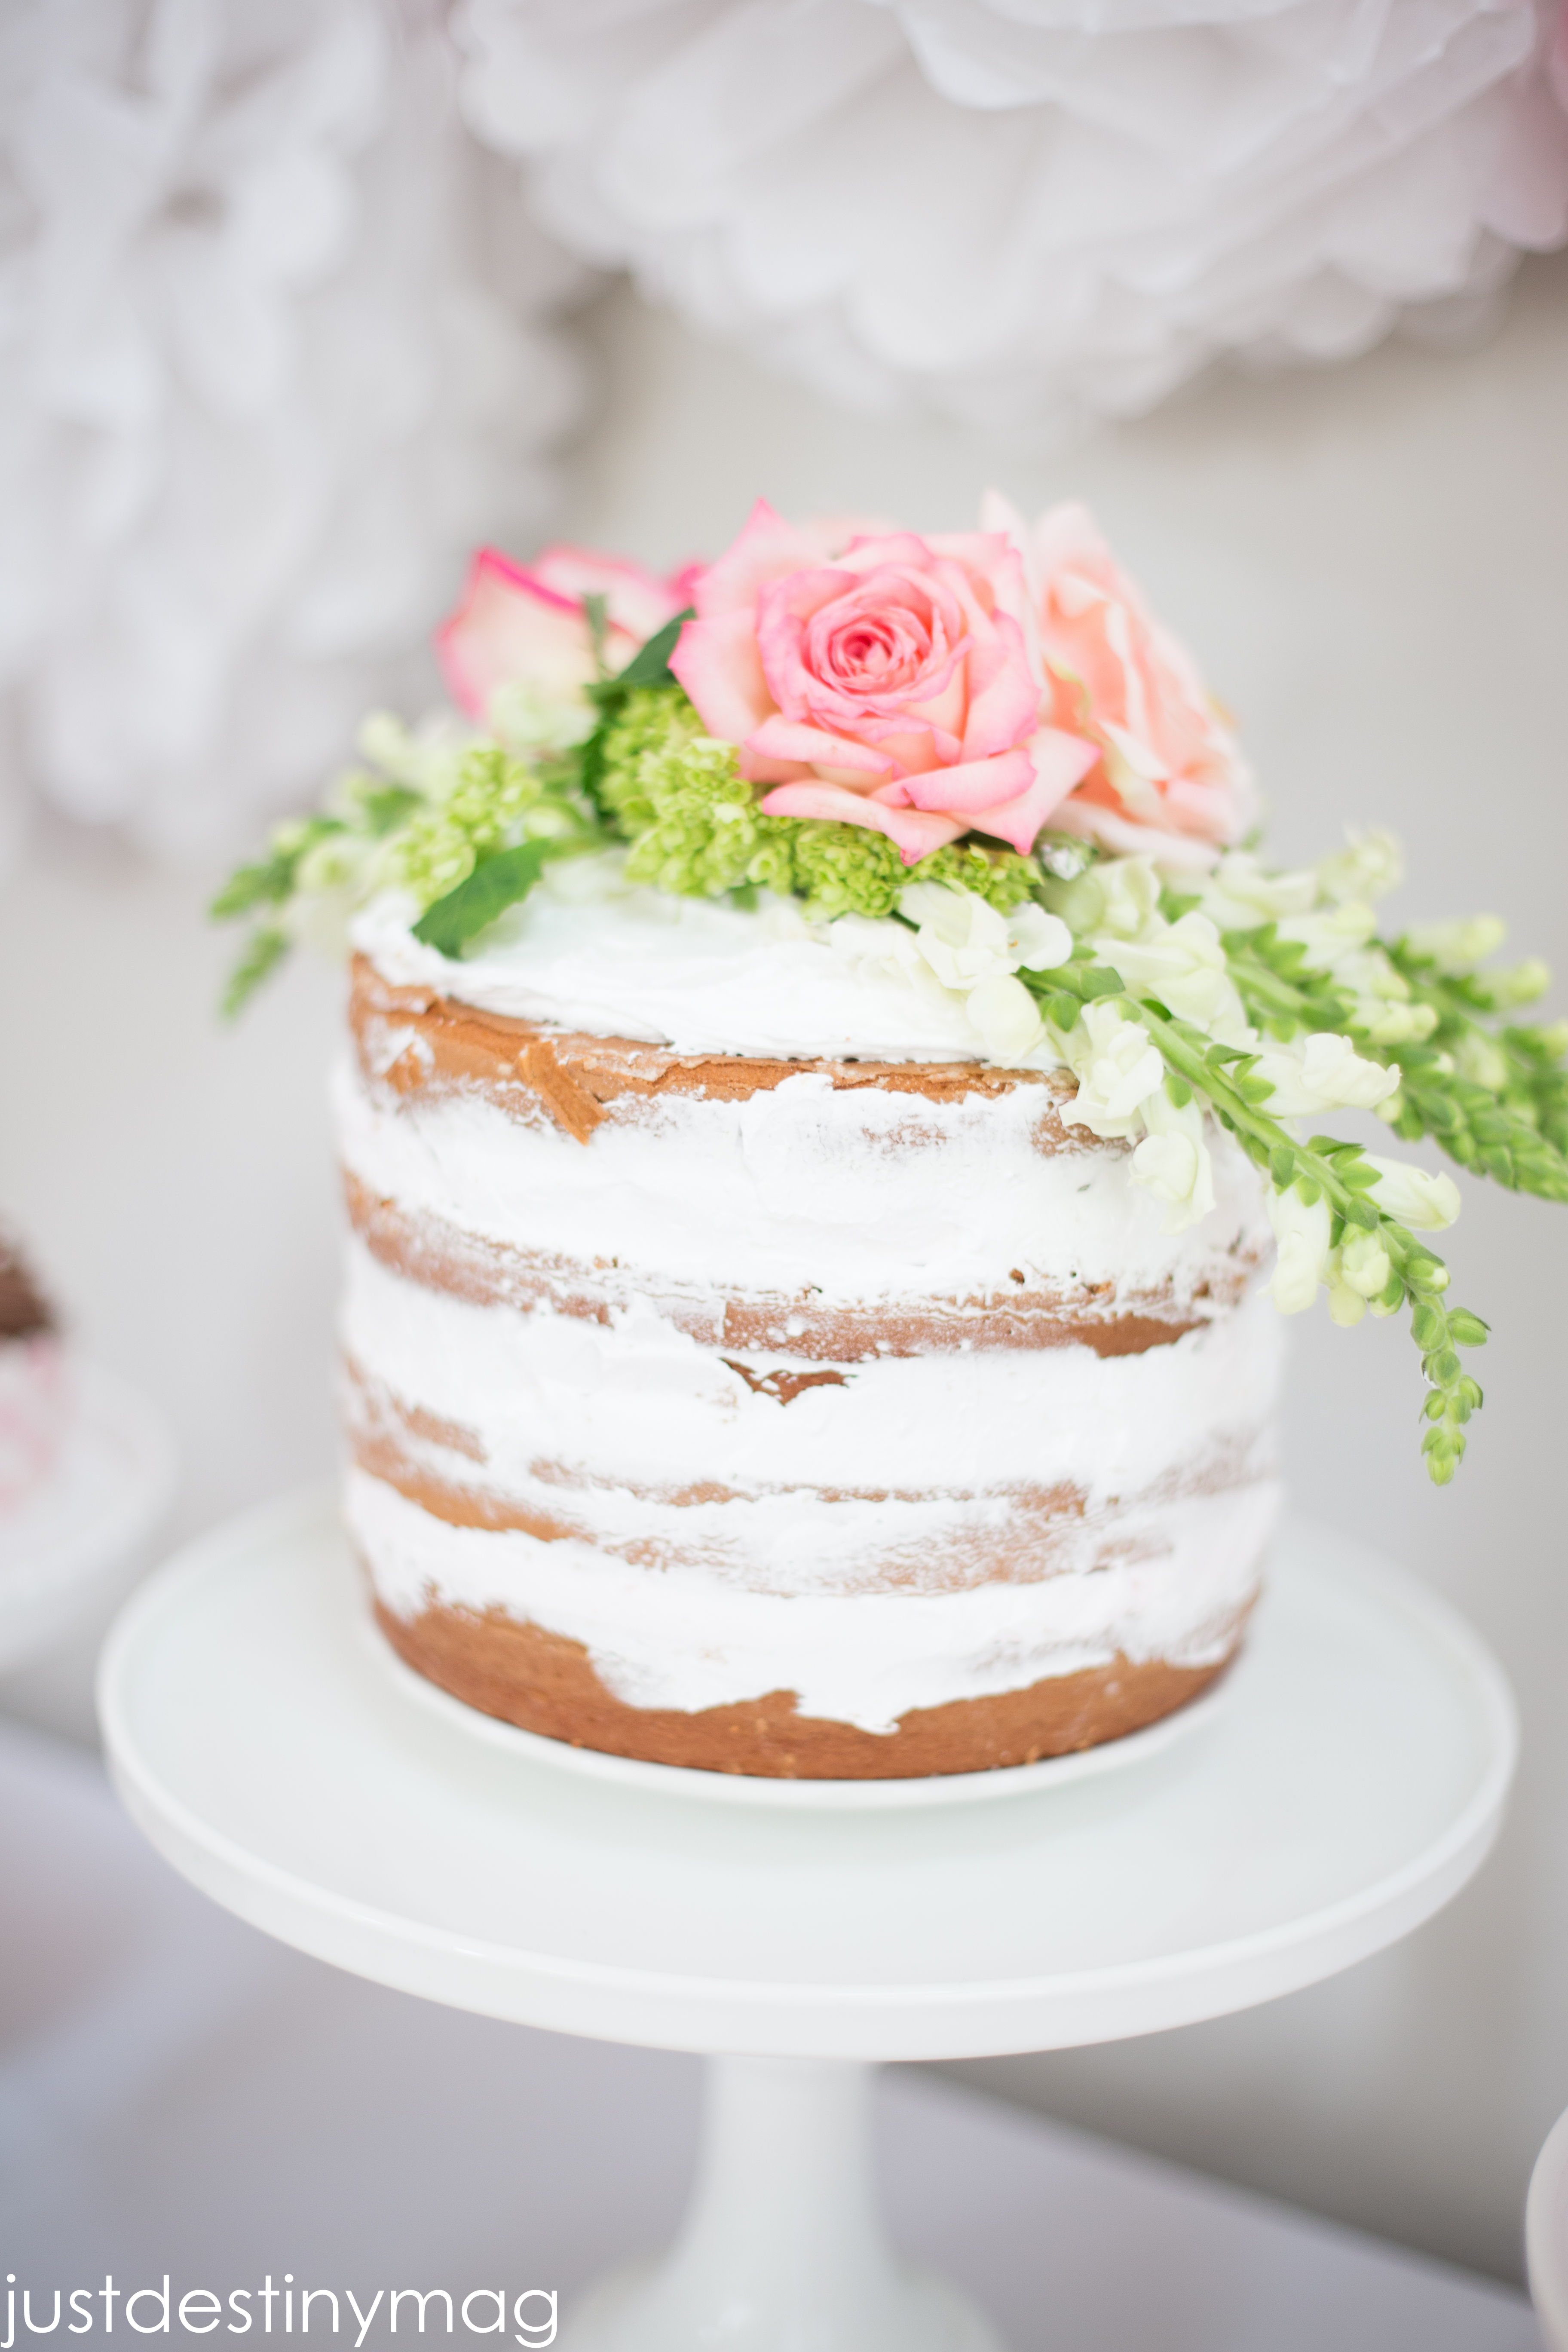 How to Make a Naked Cake